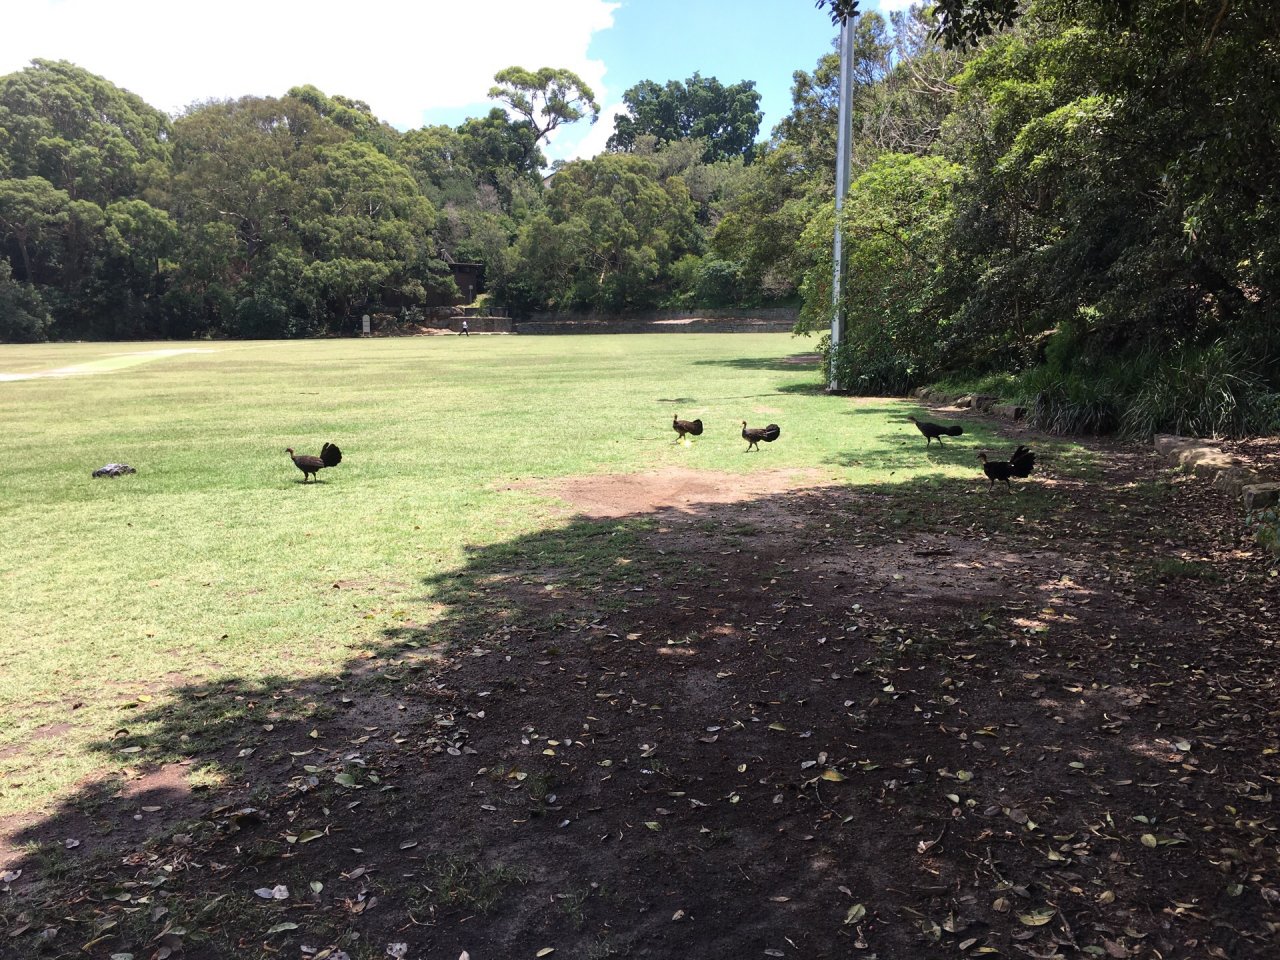 Brush-turkey in Big City Birds App spotted by rabsda on 05.01.2021